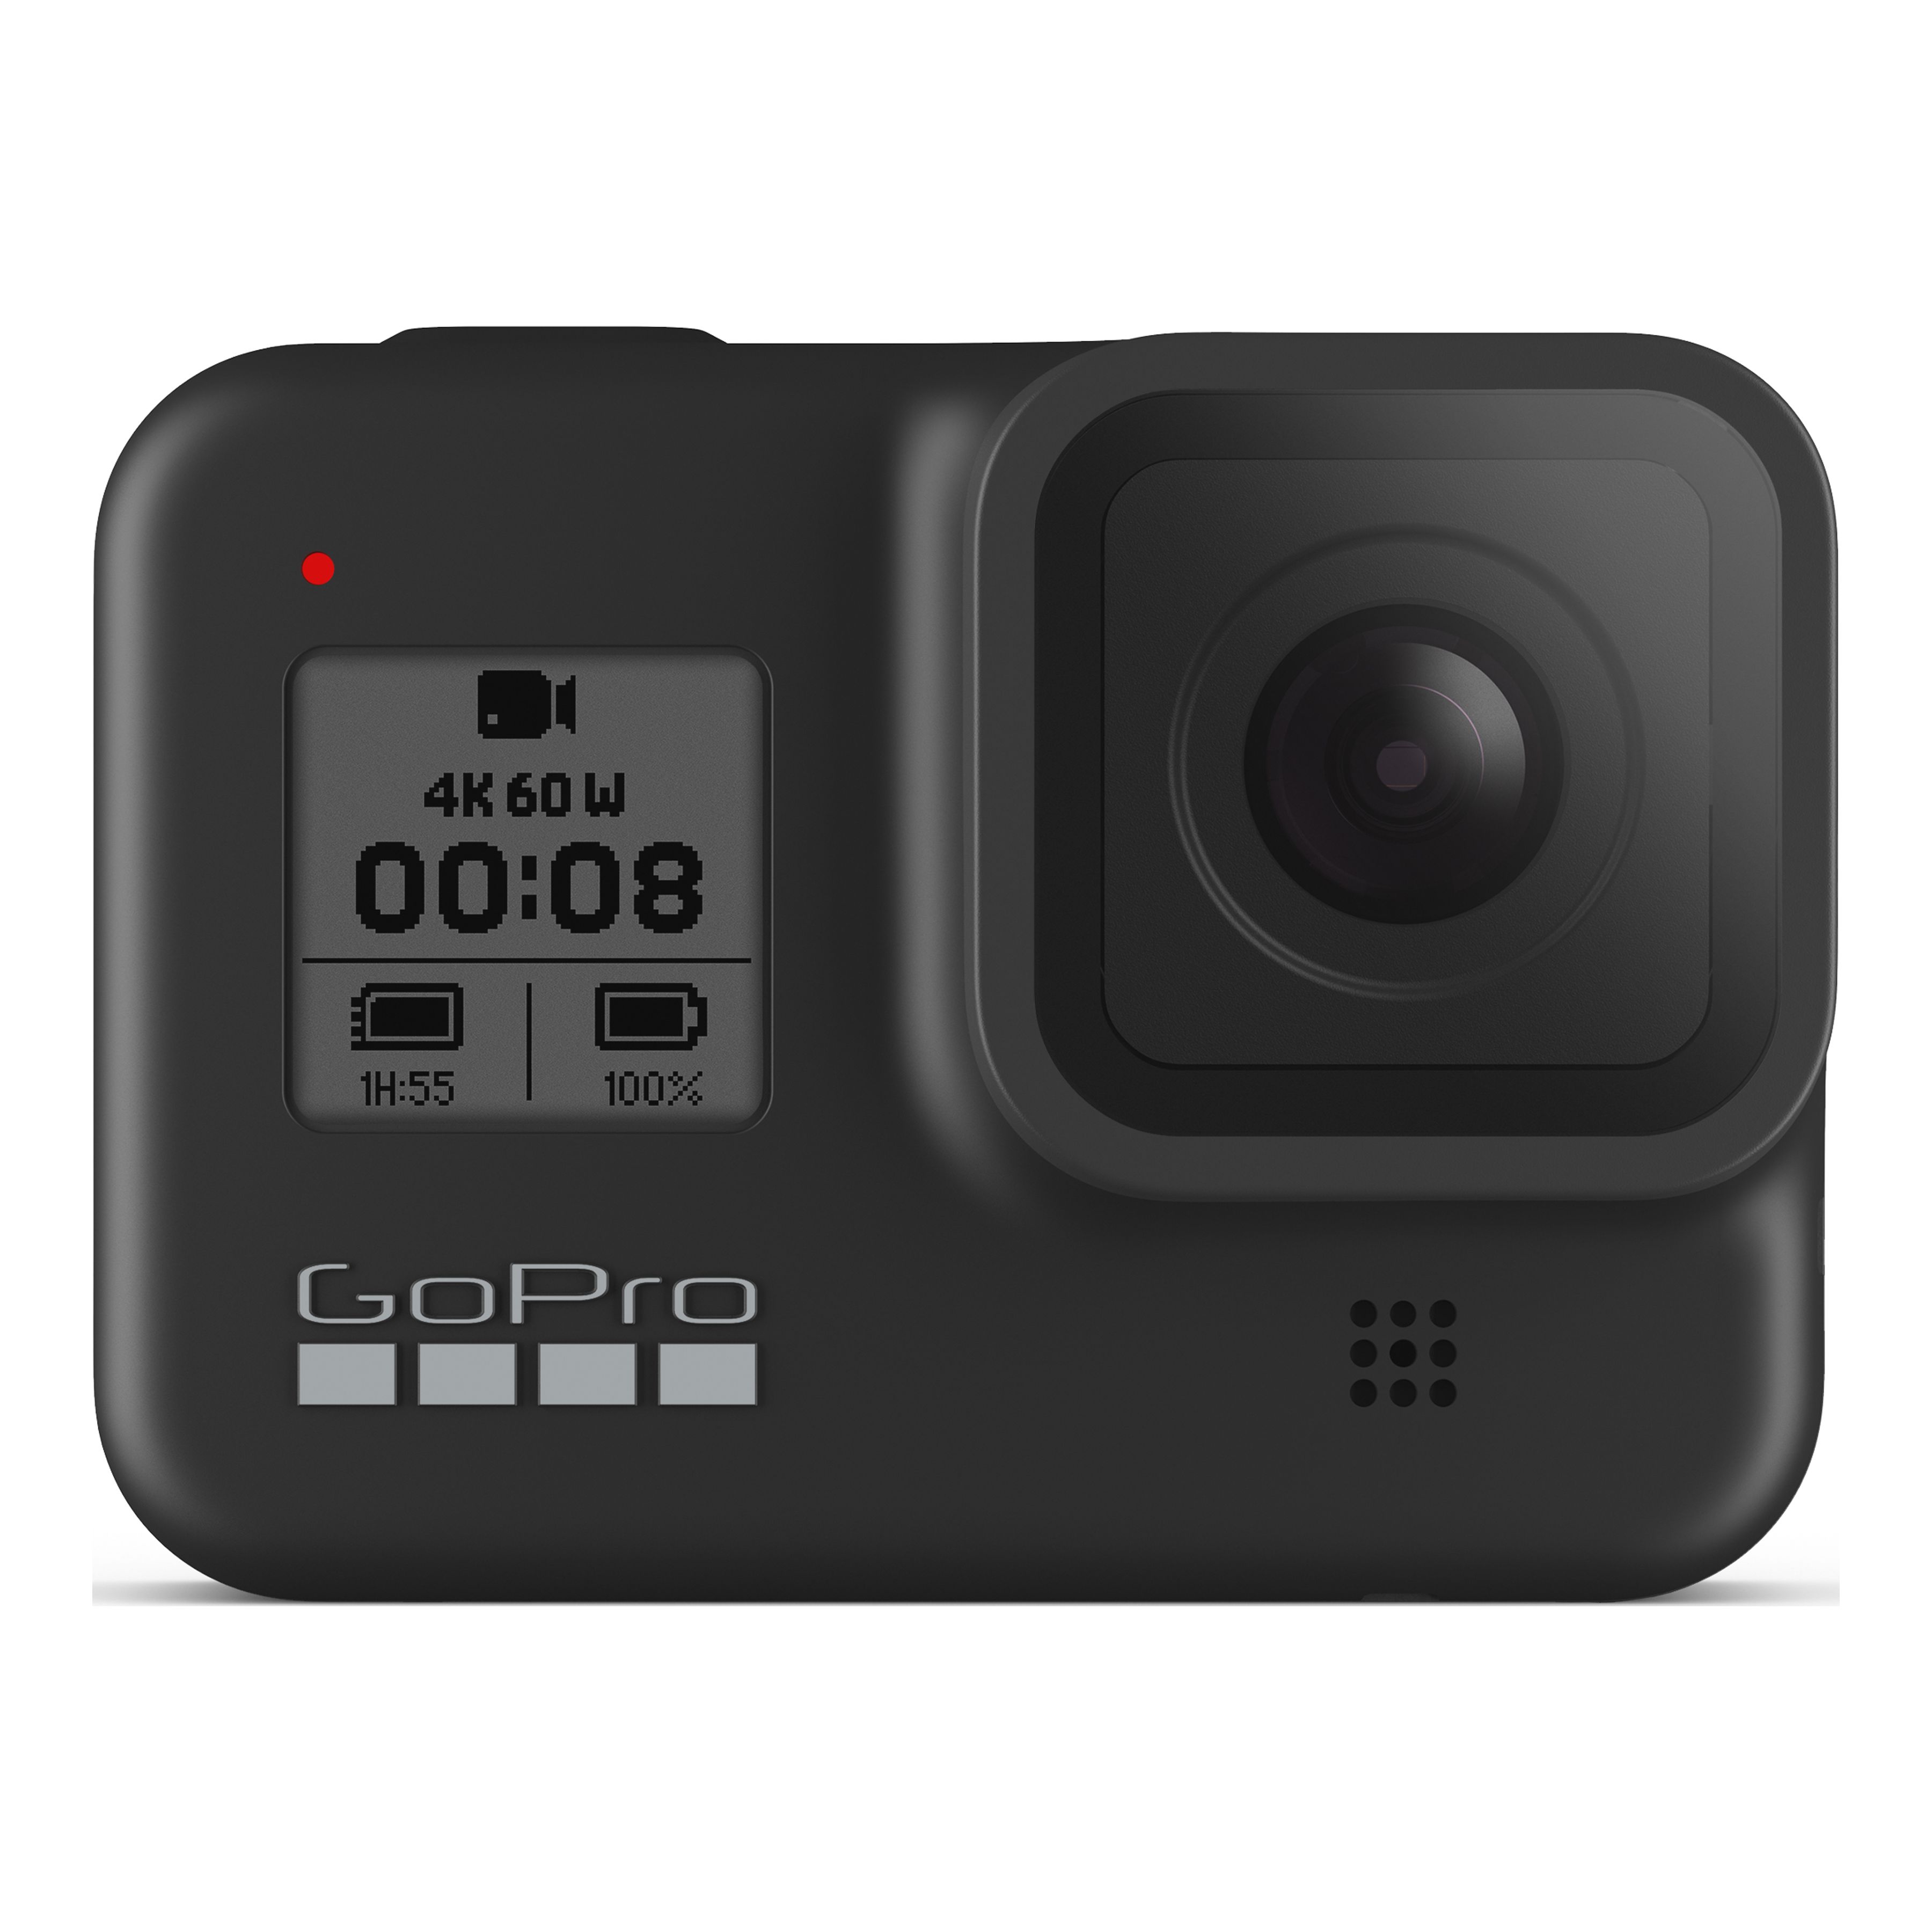 GoPro HERO8 Black Action Camera Bundle with Dual Battery Charger & Bonus Battery - Includes 3 Total Batteries - image 2 of 6